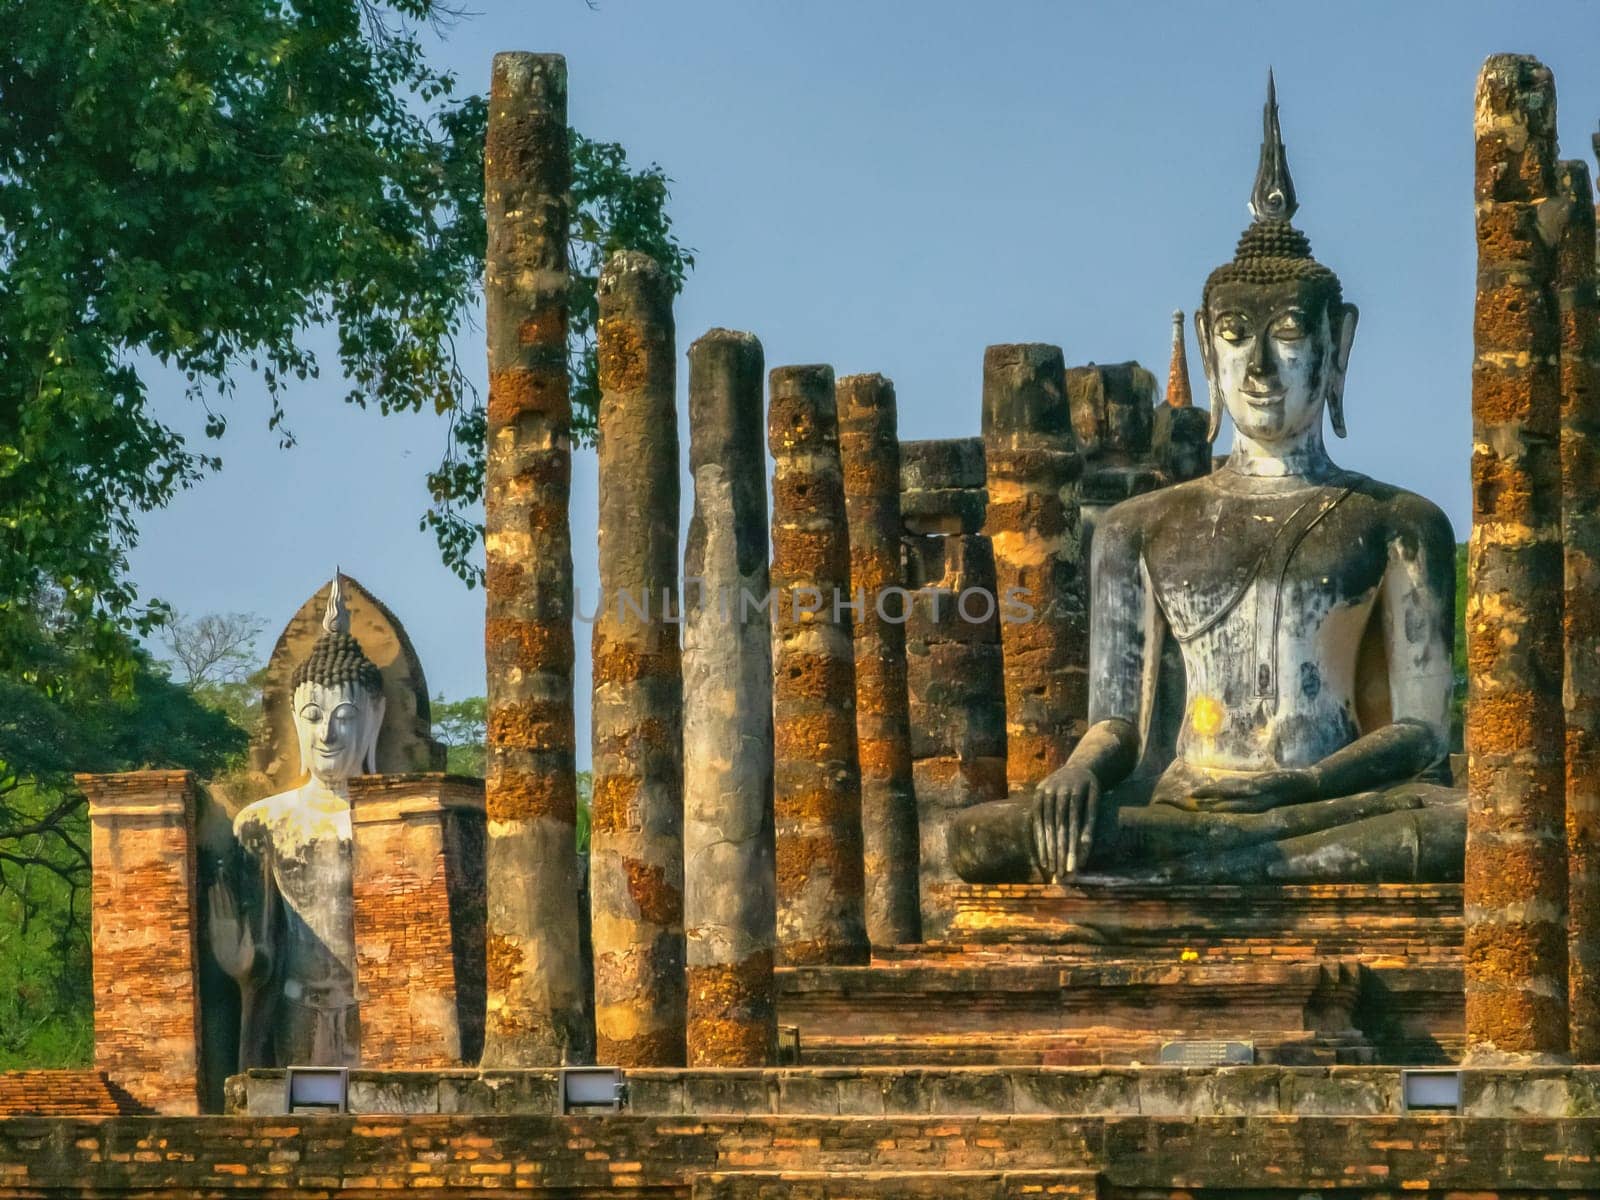 Buddha at Wat Mahathat temple in Sukhothai historical park by day, UNESCO World Heritage Site, Thailand